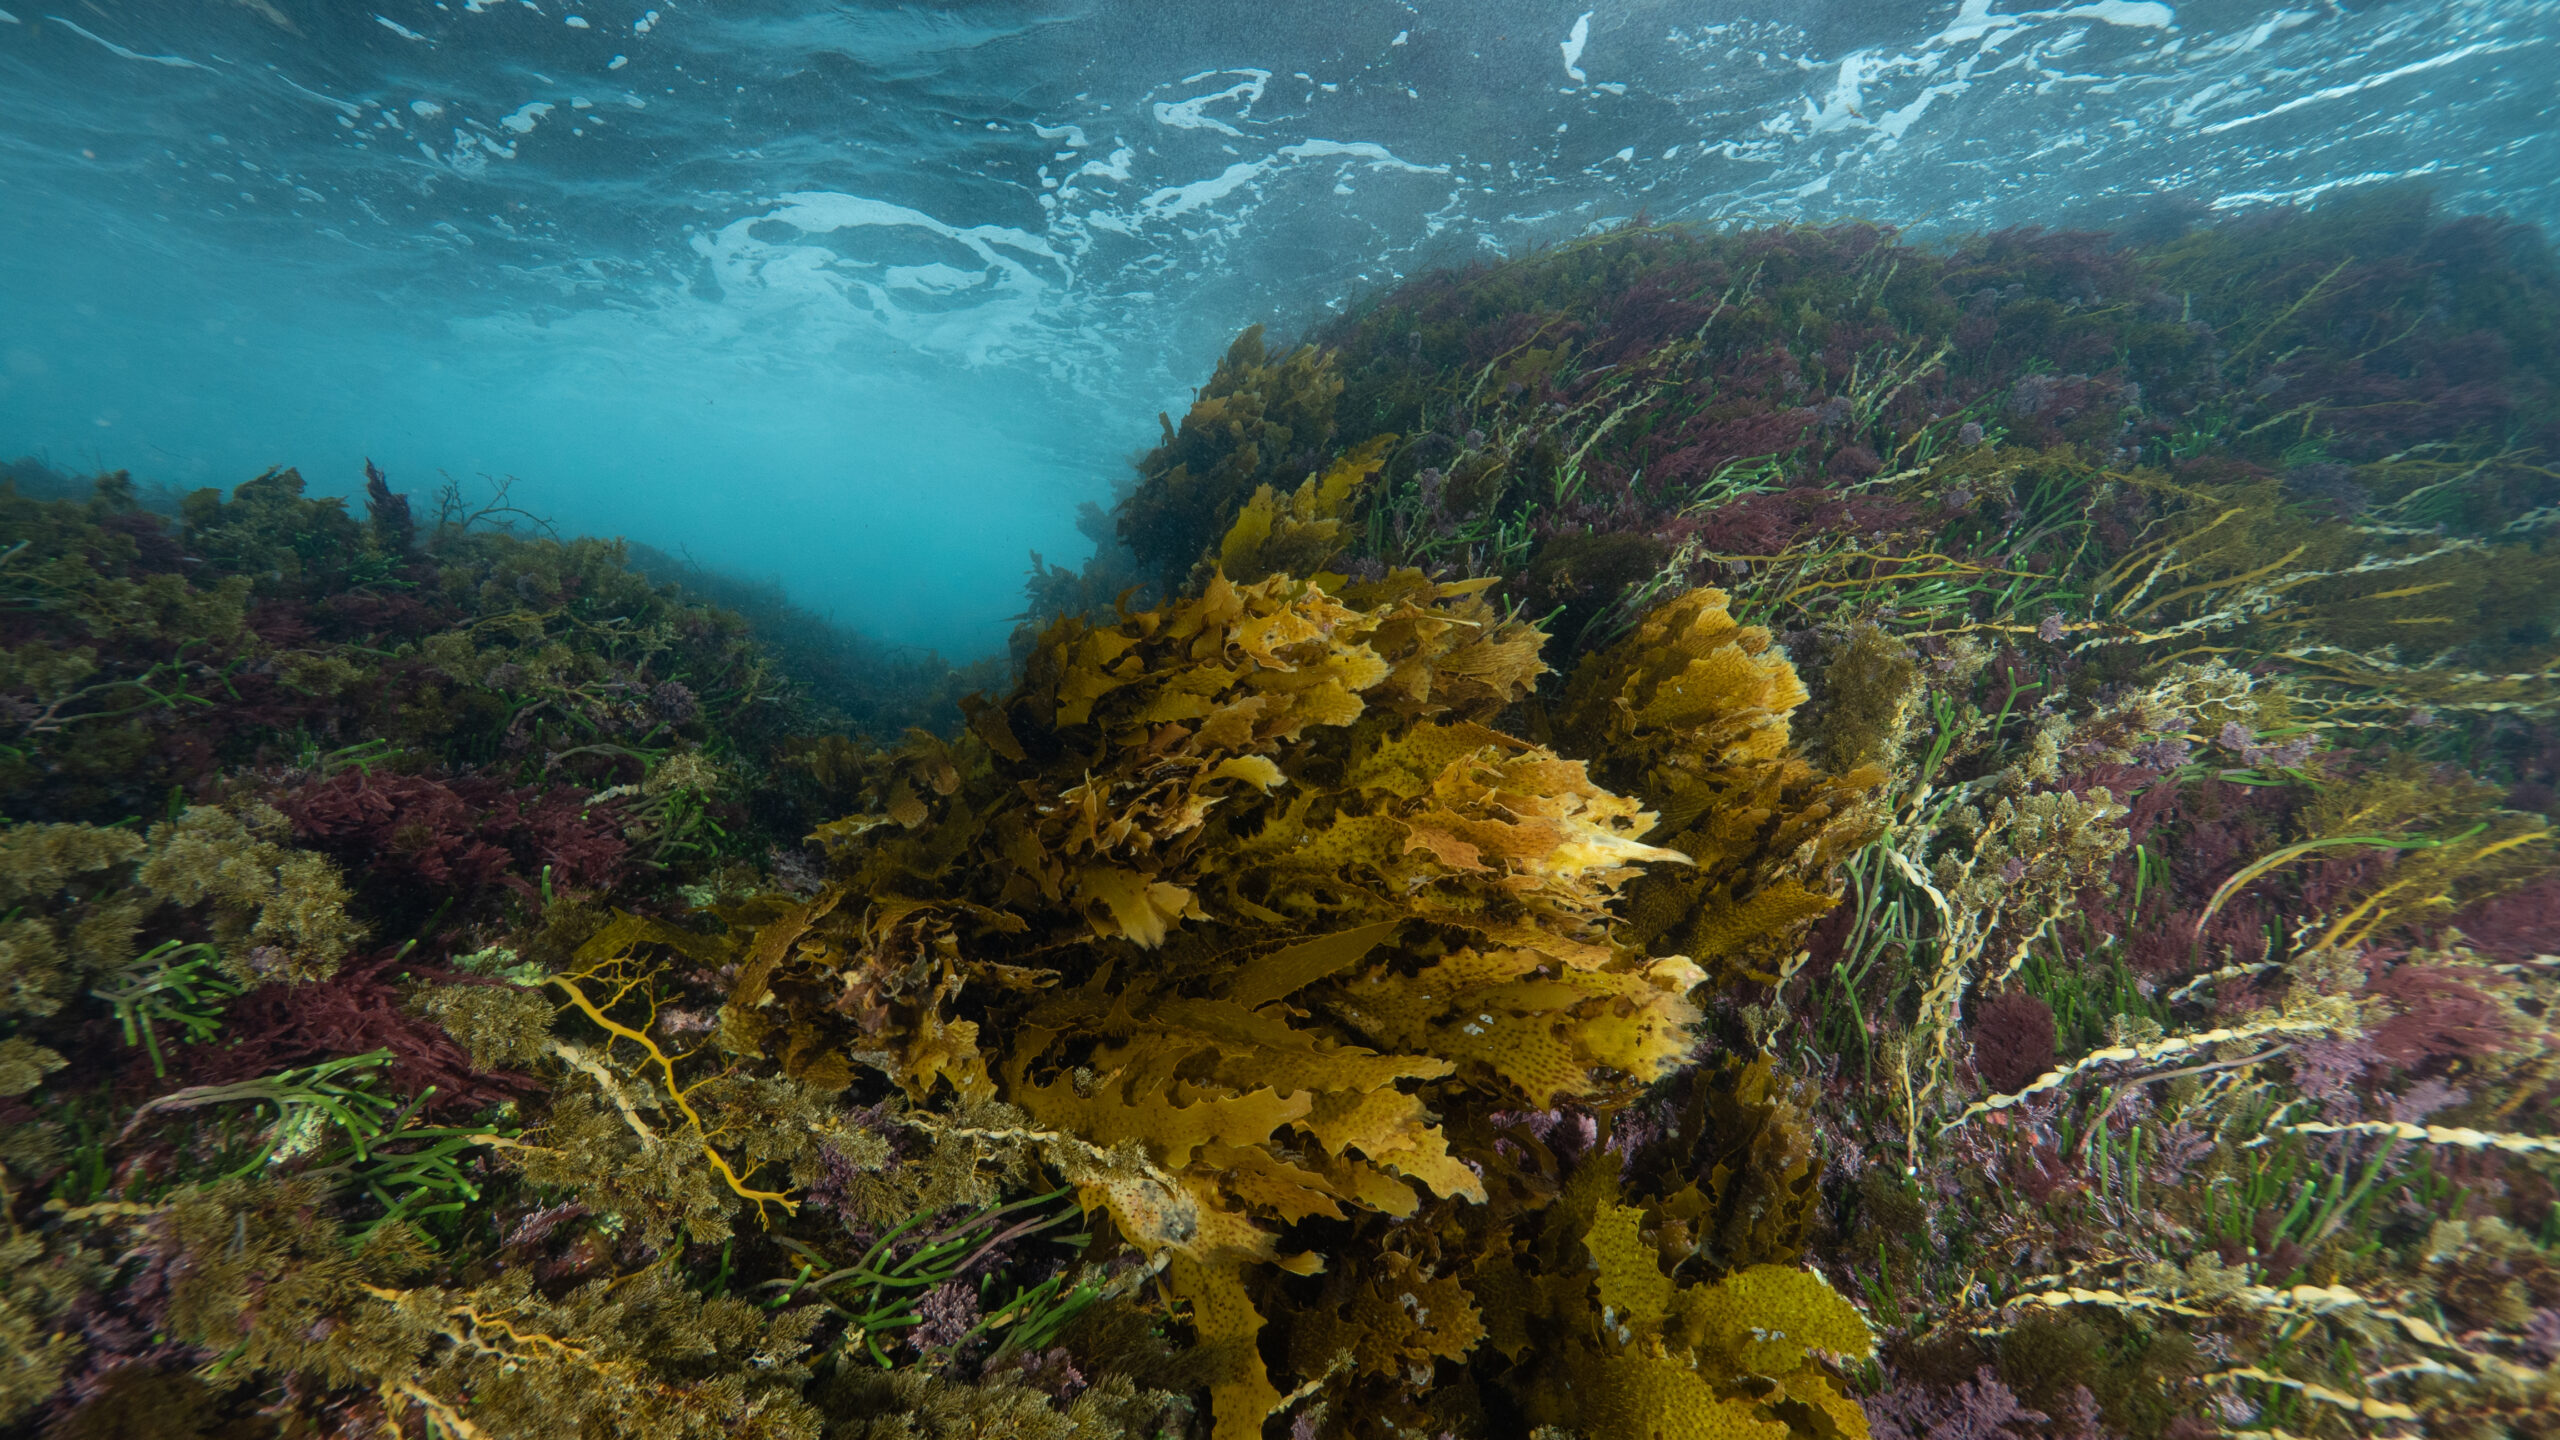 A forest of kelp waves in the current, with waves on the ocean's surface visible above.